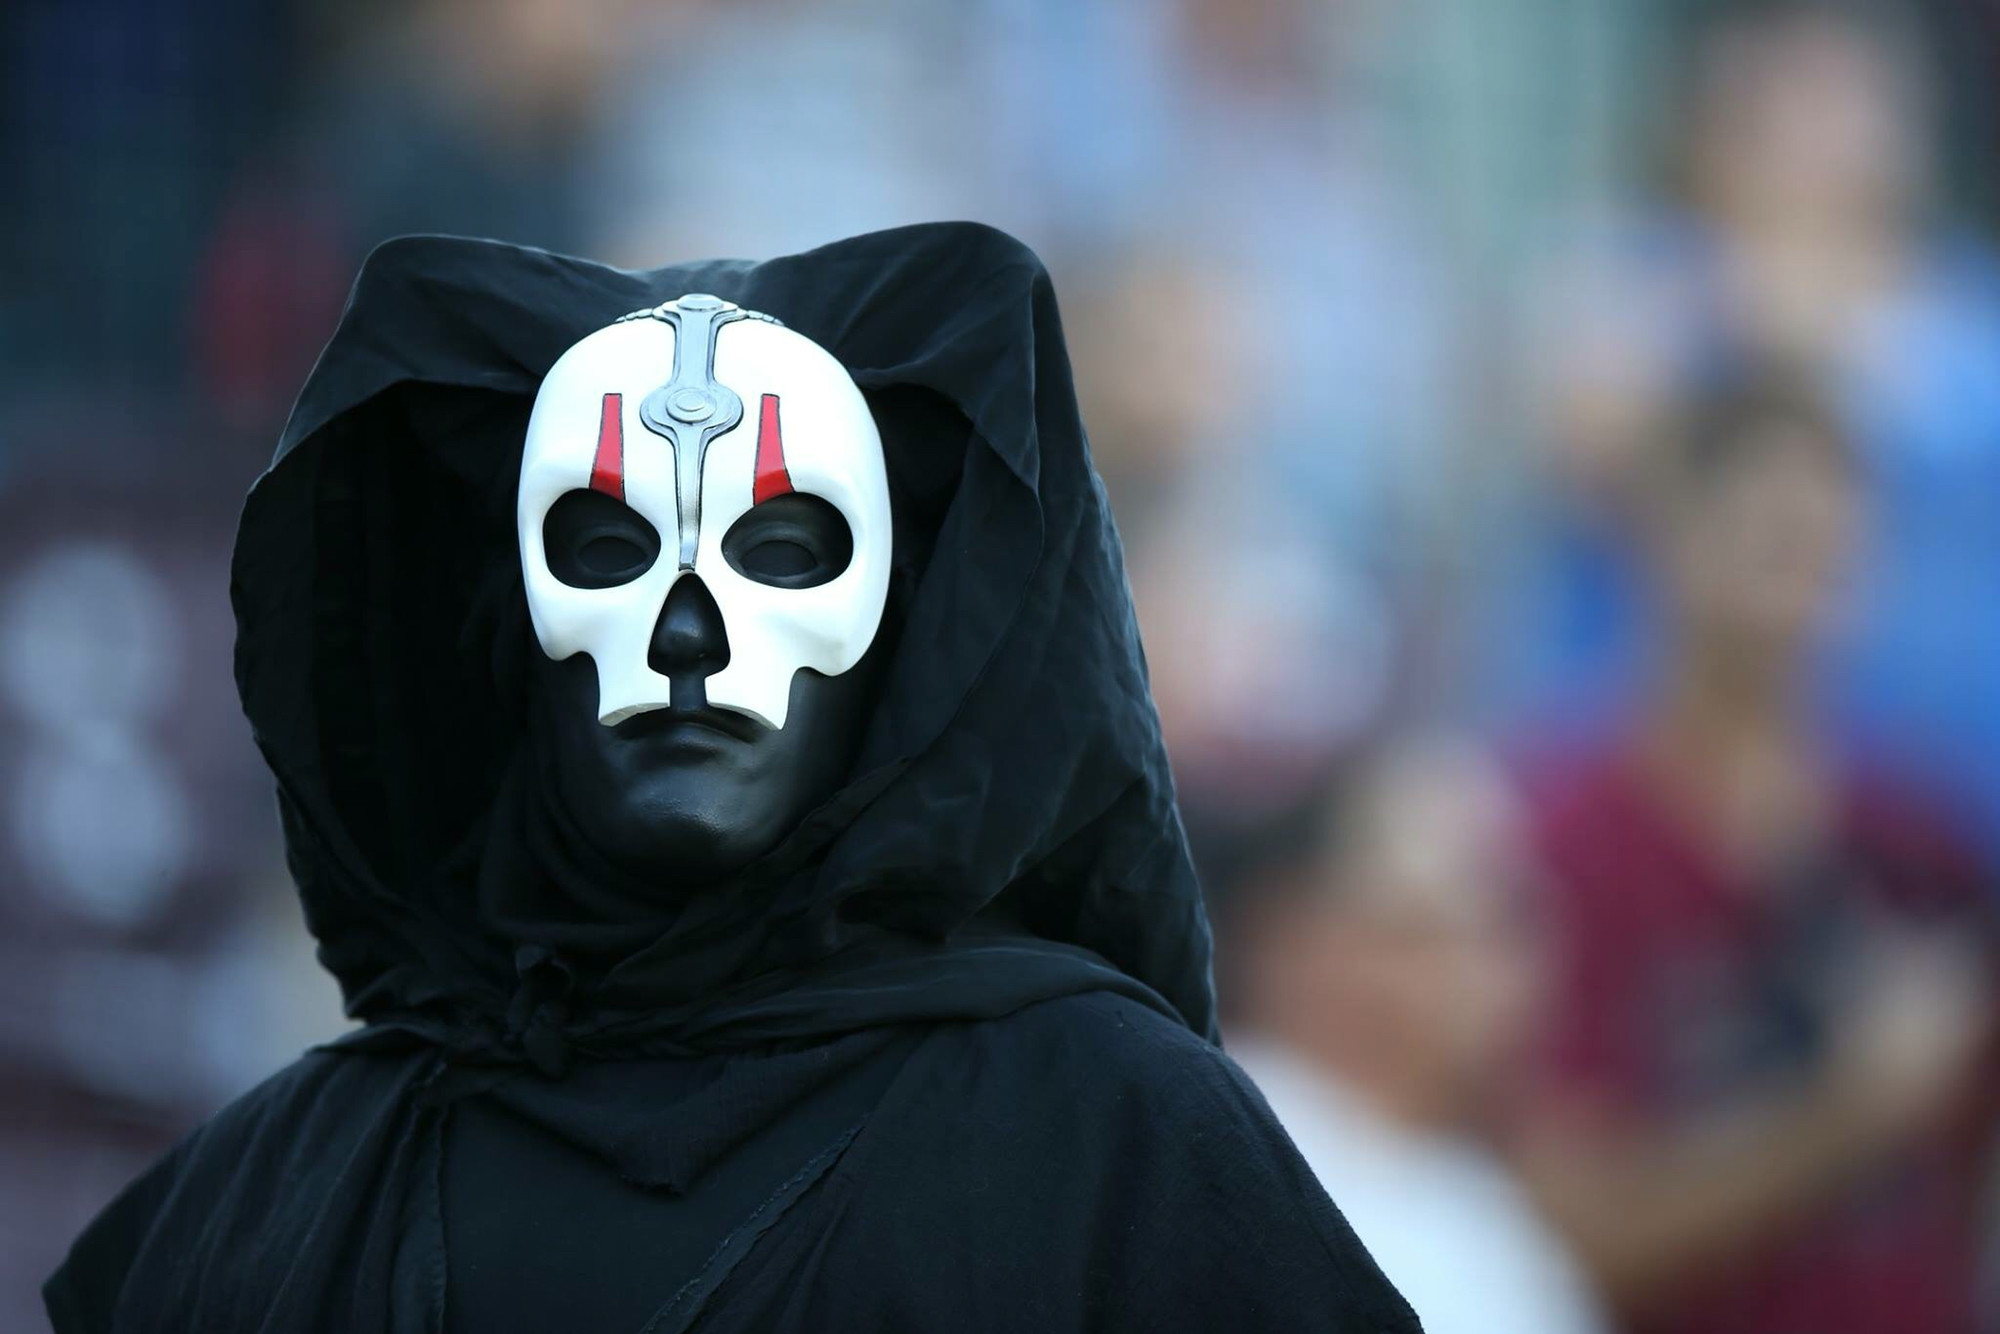 2000x1334 Darth Nihilus cosplay from Star Wars Knights of the Old Republic II.